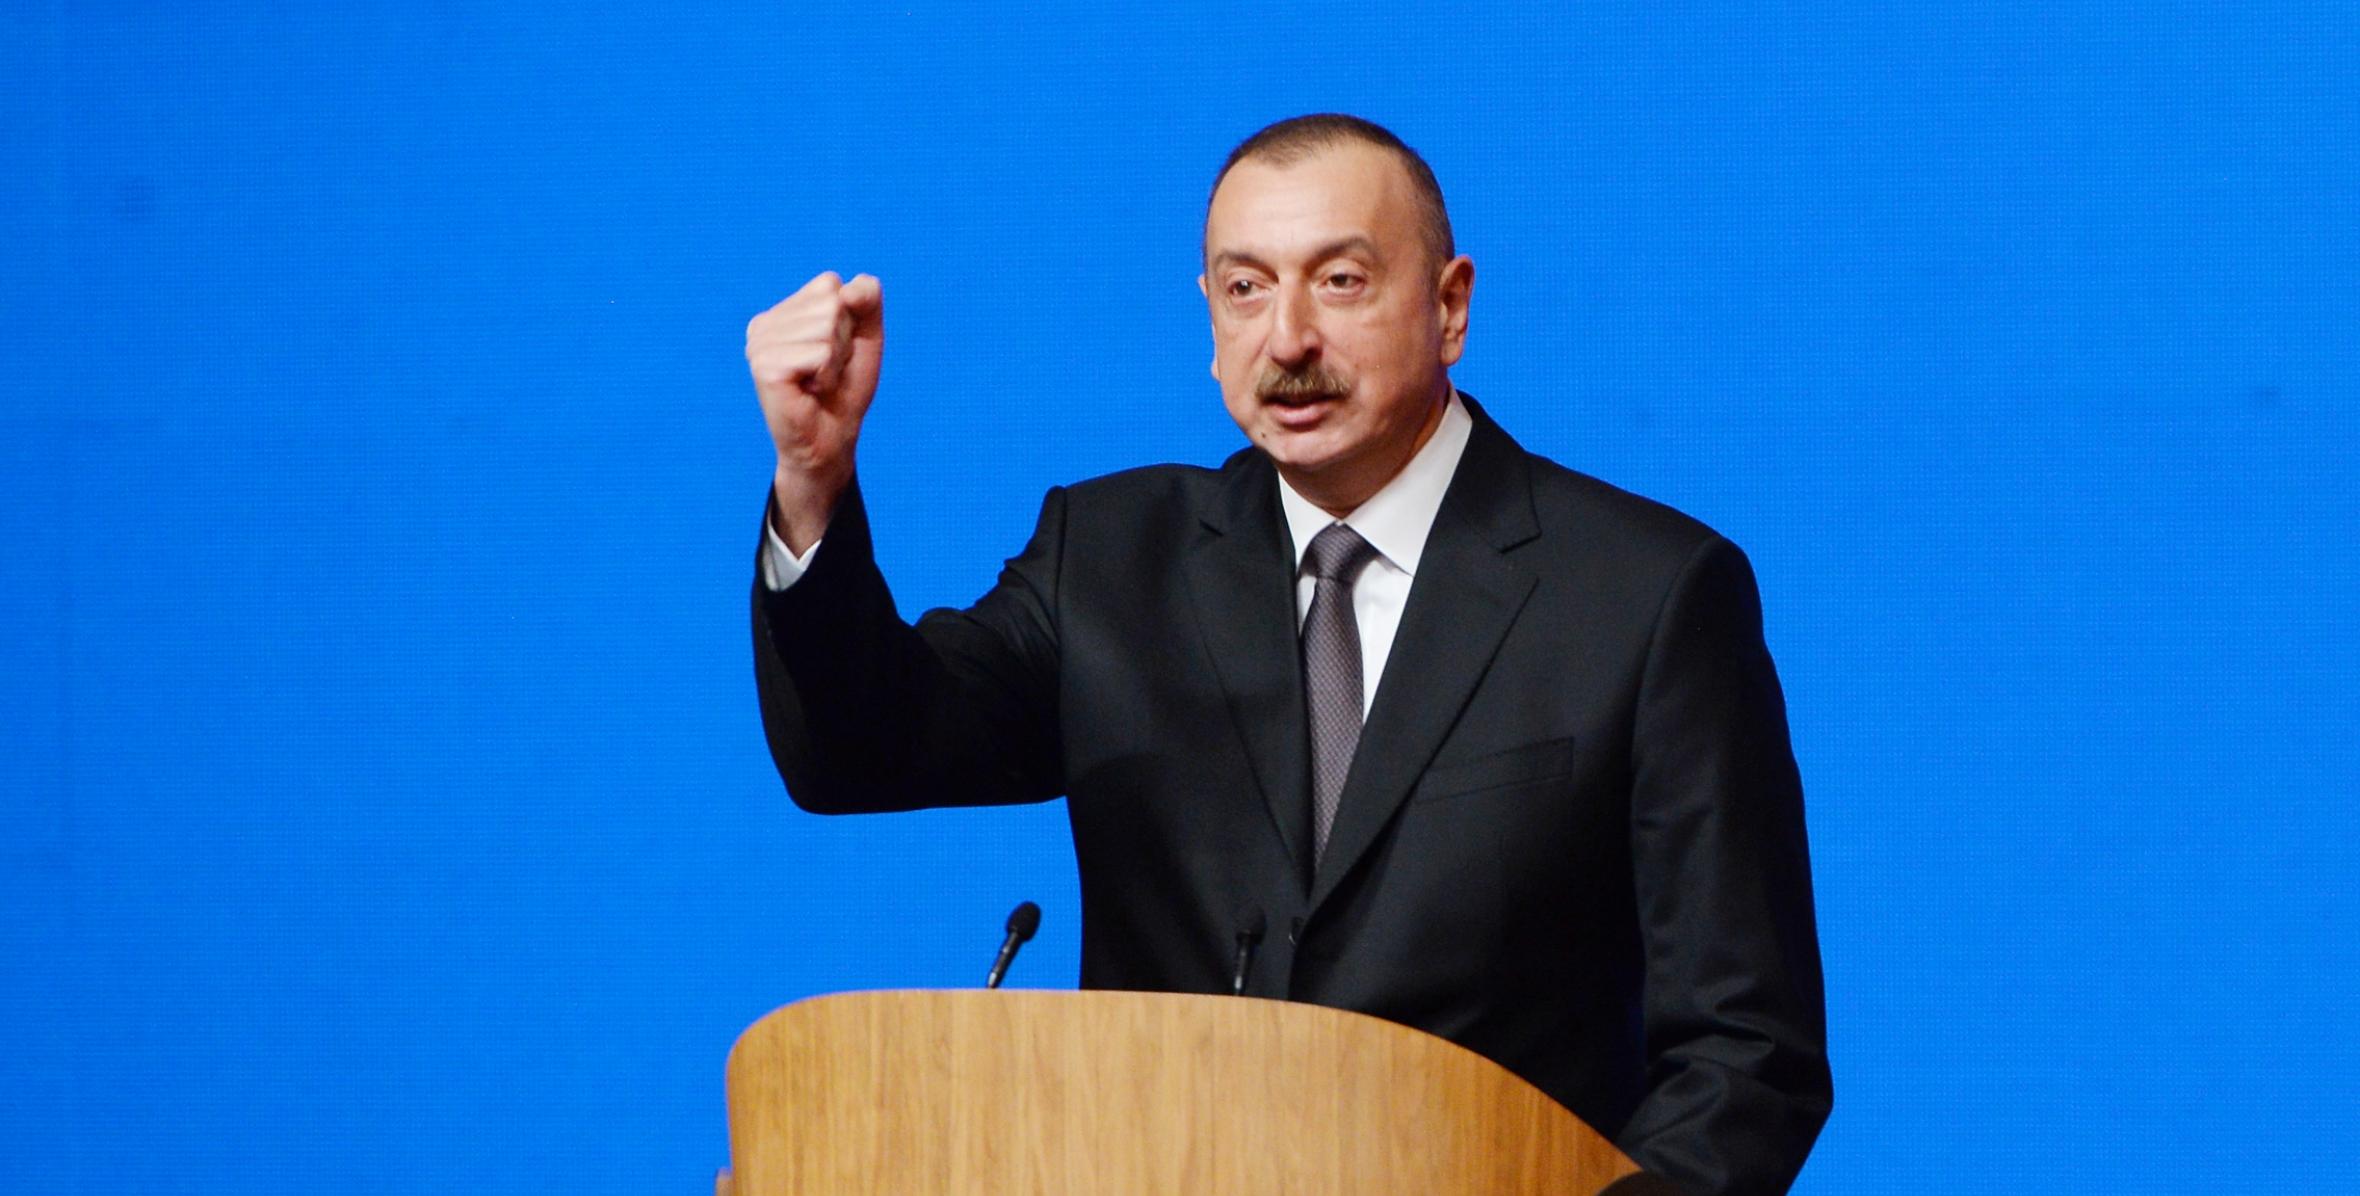 Speech by Ilham Aliyev at  the 6th Congress of New Azerbaijan Party